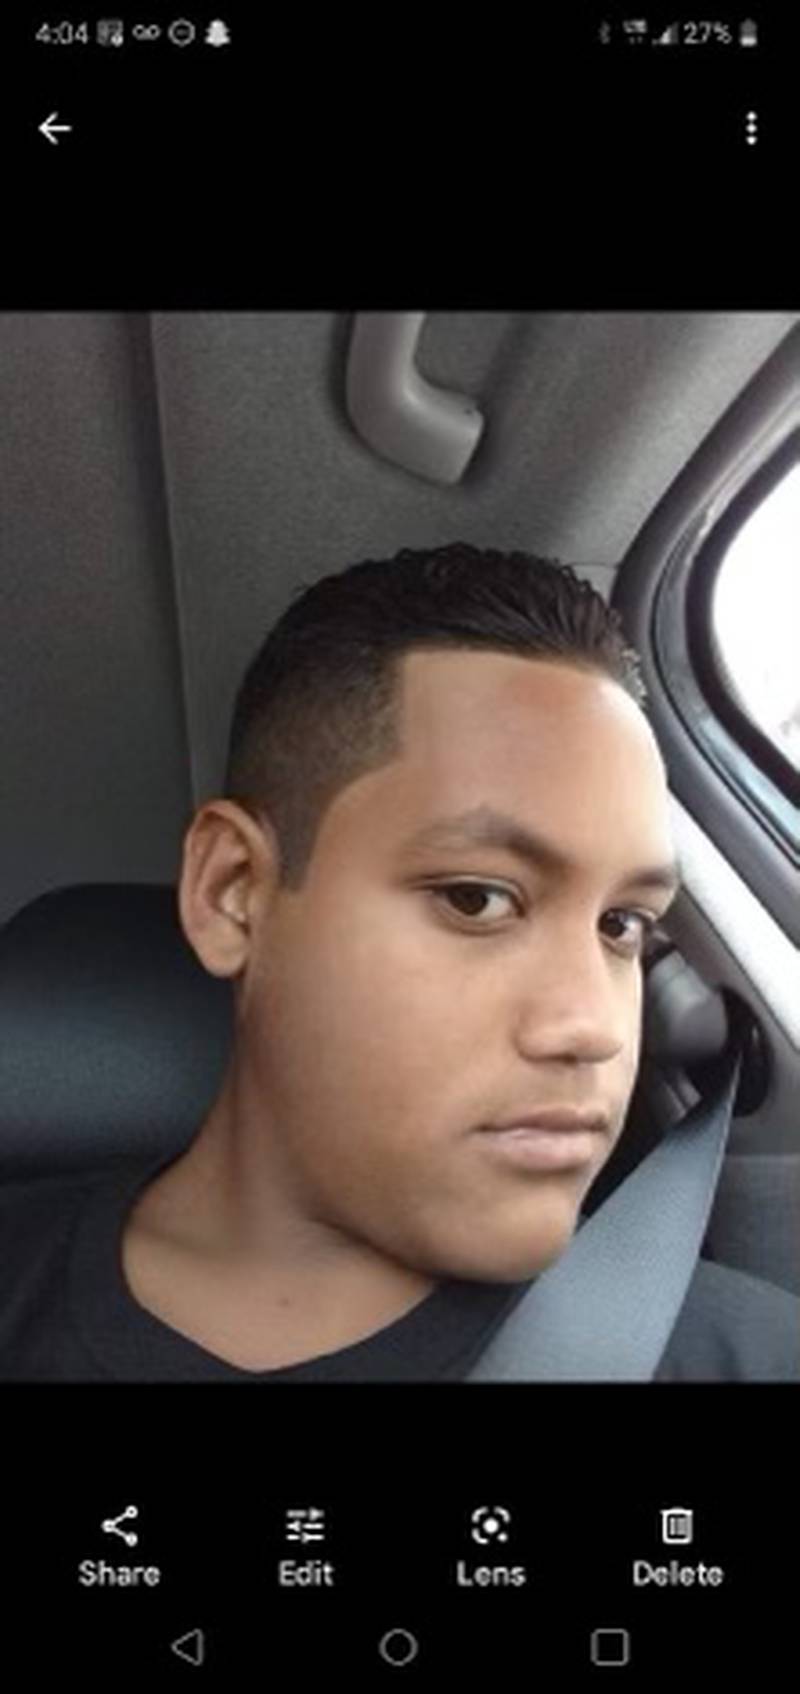 A 14-year-old Hastings boy died Sunday after he was struck by a pickup truck in St. Johns County. The family has identified the victim as 14-year-old Xaiver Santana.